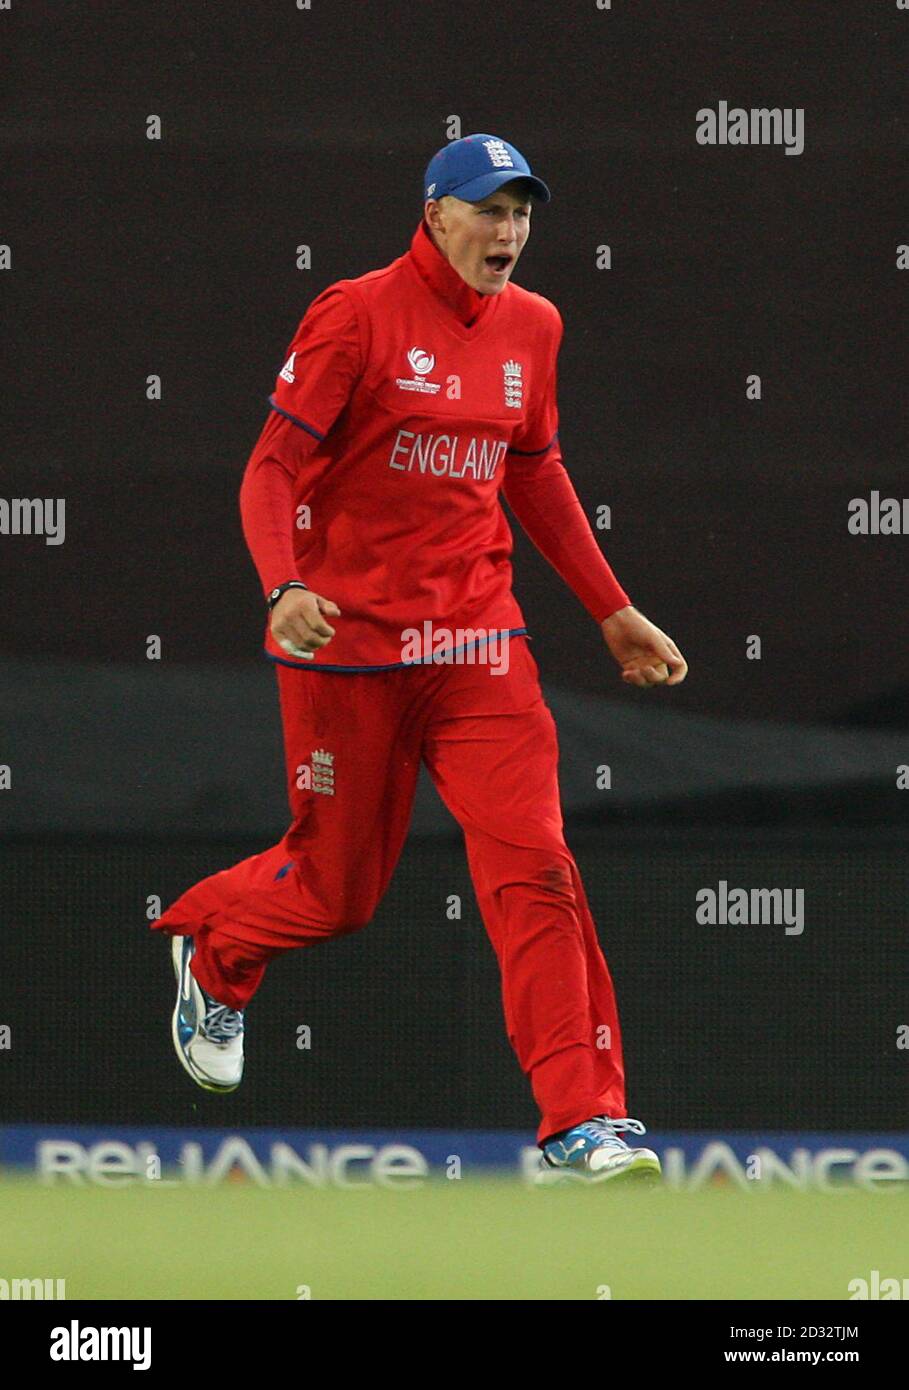 England's Joe Root celebrates catching out Sri Lanka's Tillakaratne Dilshan during the ICC Champions Trophy match at The Kia Oval, London. Stock Photo